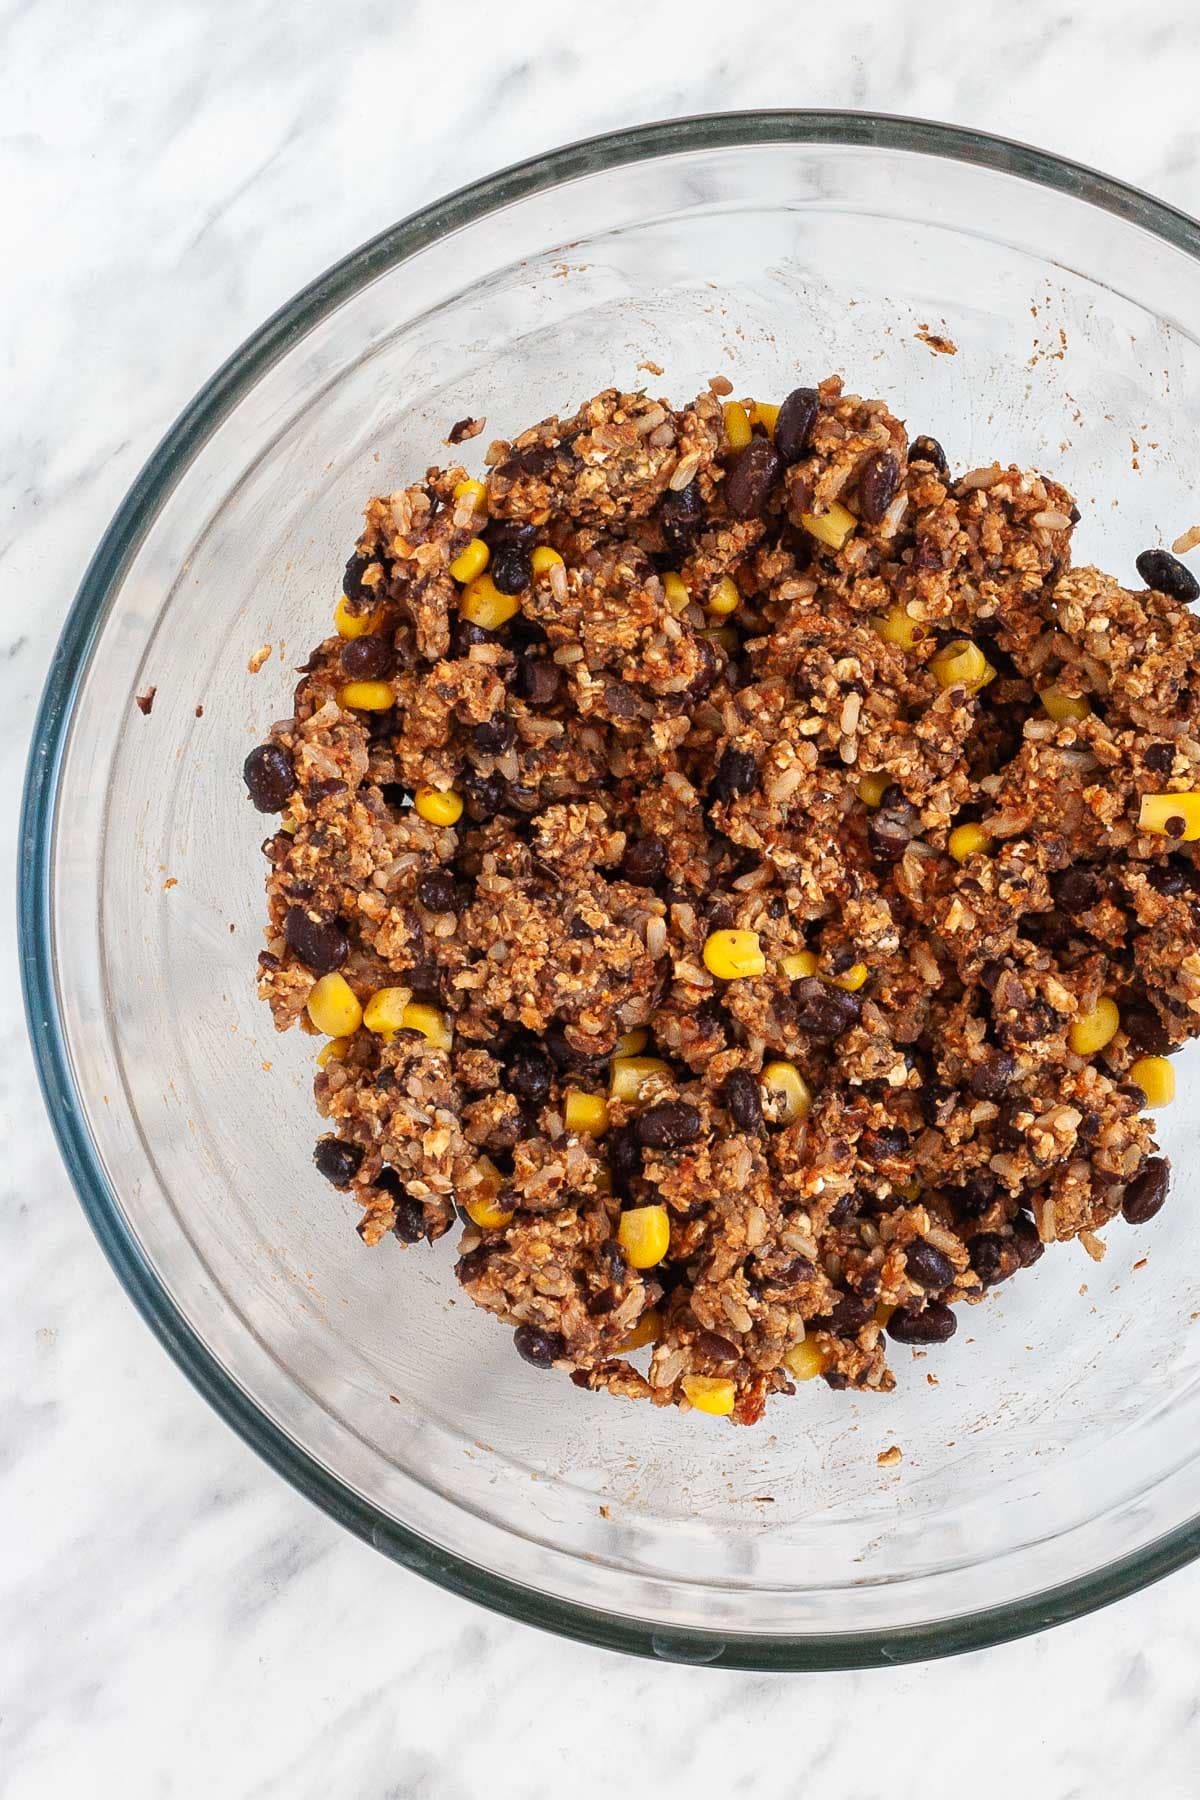 Brown crumbly textured mix with sweet corn and black beans in a glass bowl.